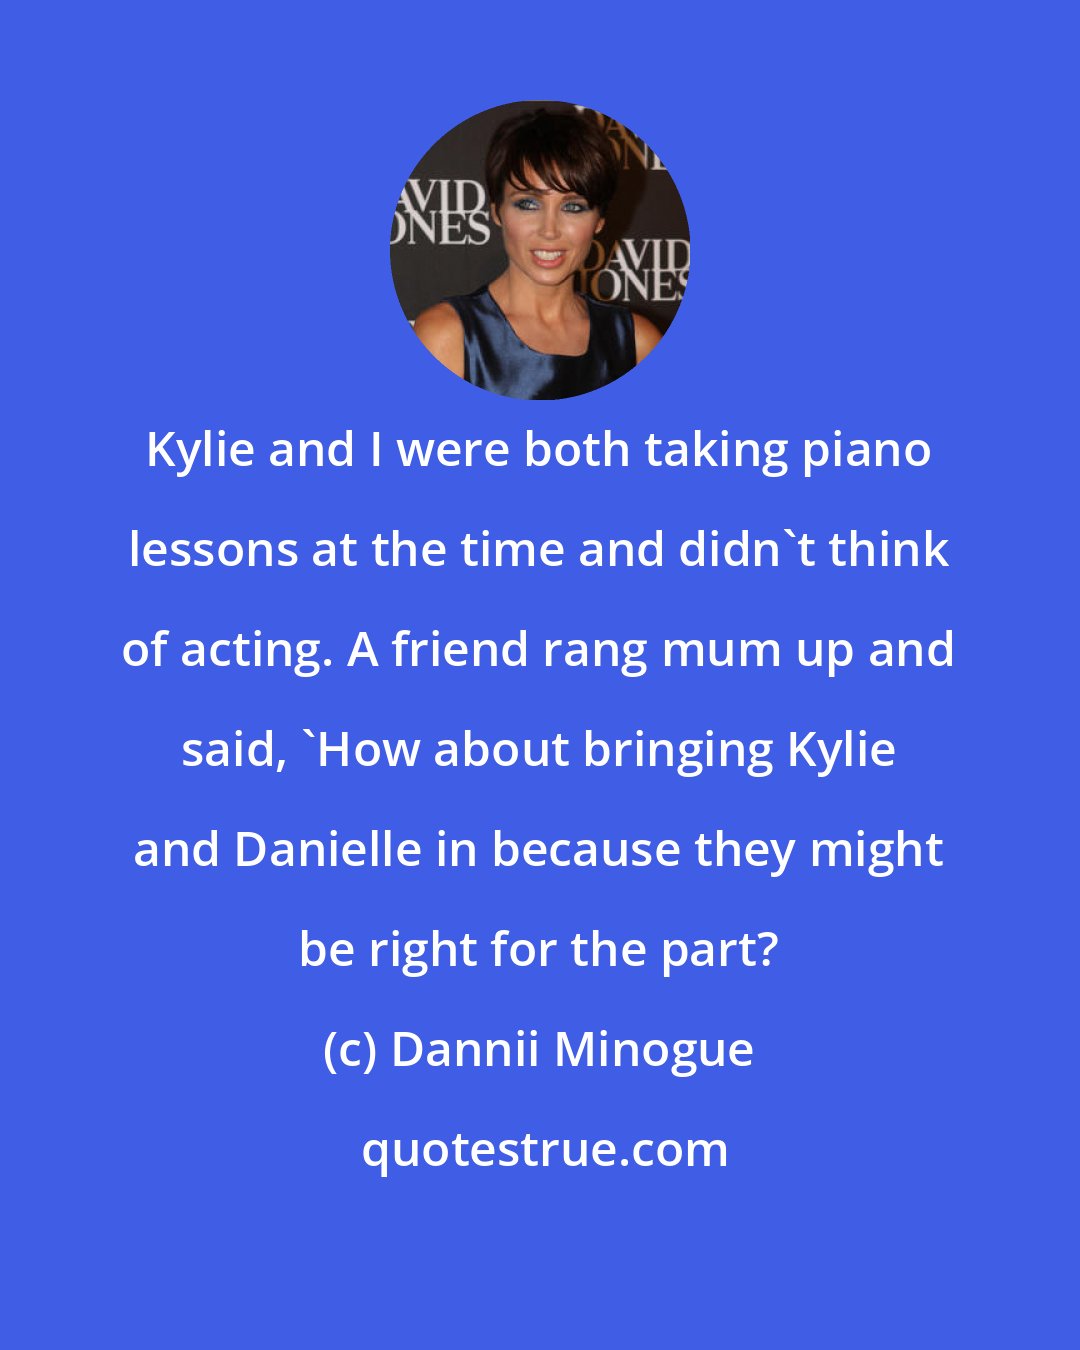 Dannii Minogue: Kylie and I were both taking piano lessons at the time and didn't think of acting. A friend rang mum up and said, 'How about bringing Kylie and Danielle in because they might be right for the part?